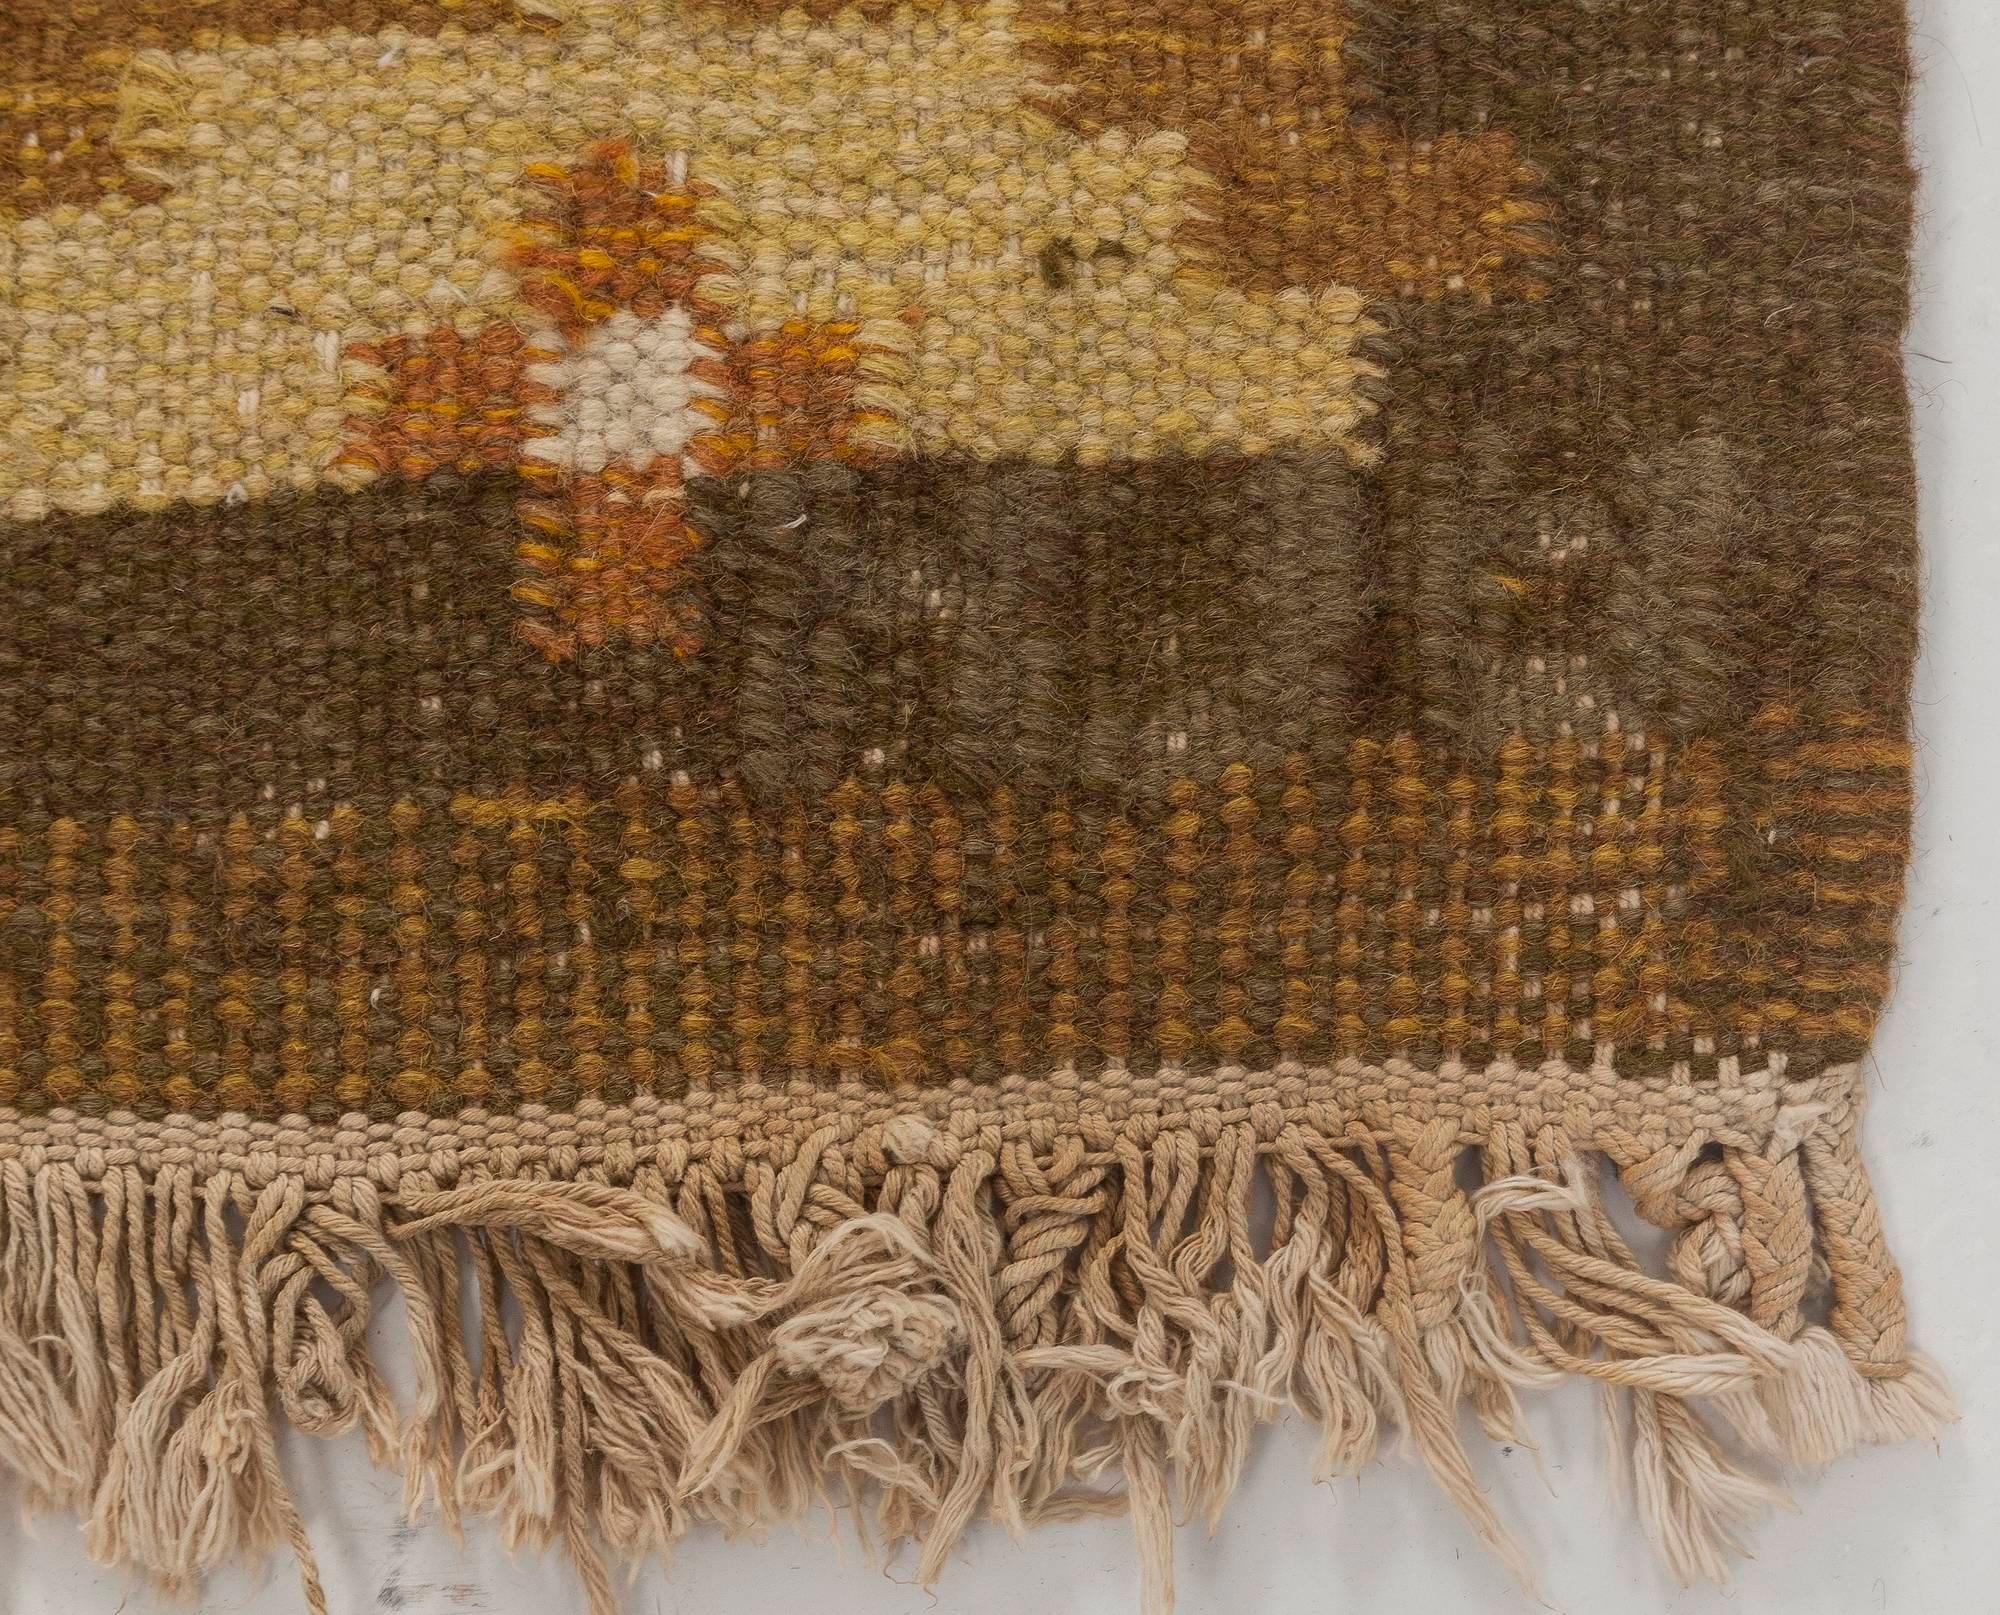 Mid-20th Century Swedish yellow, beige and brown flat-weave rug
Size: 4'10